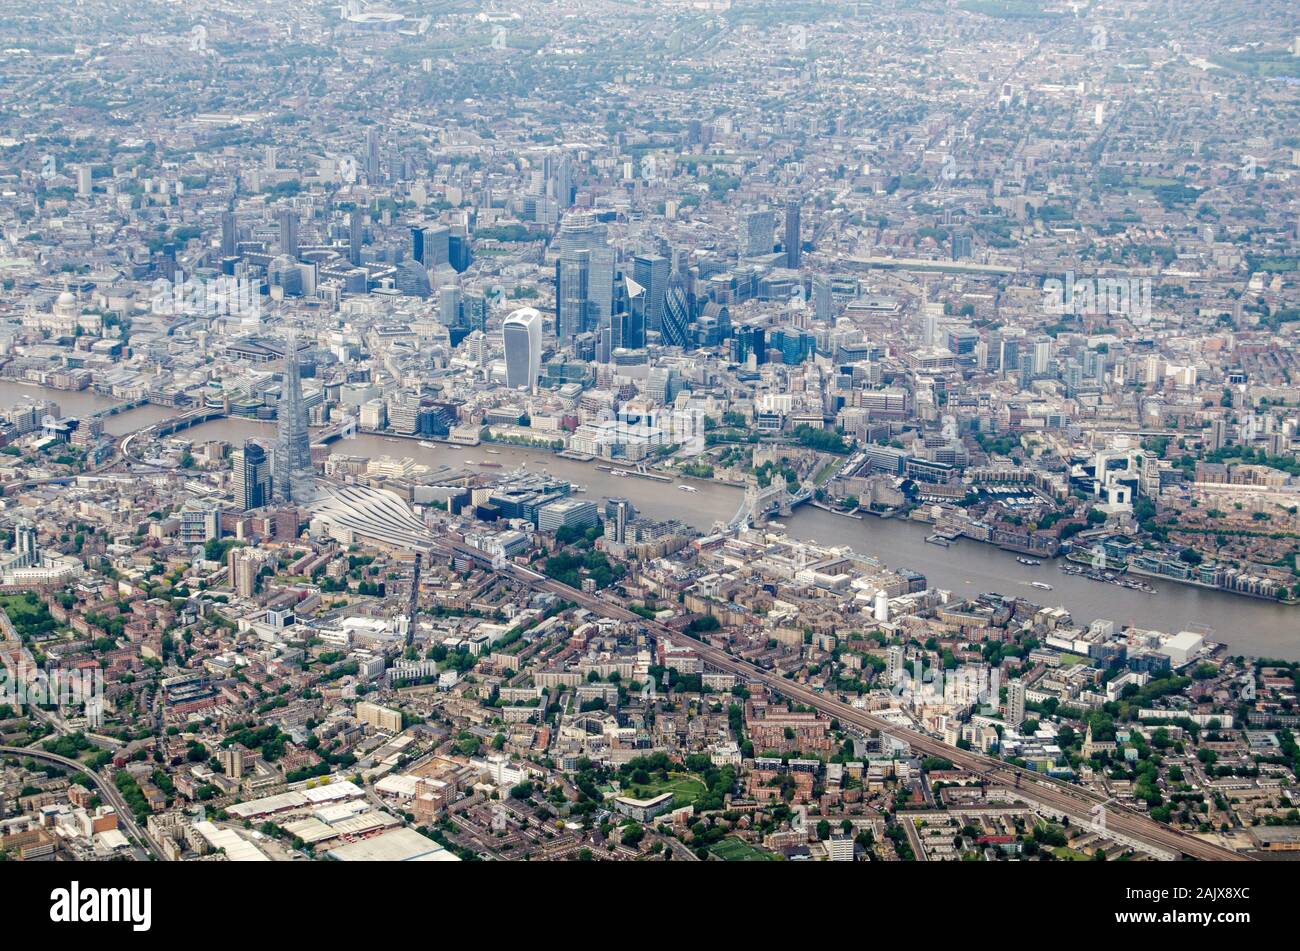 Aerial view of Southwark and the City of London with the River Thames flowing under Tower Bridge and the tower blocks of the Shard, Gherkin and the Ba Stock Photo